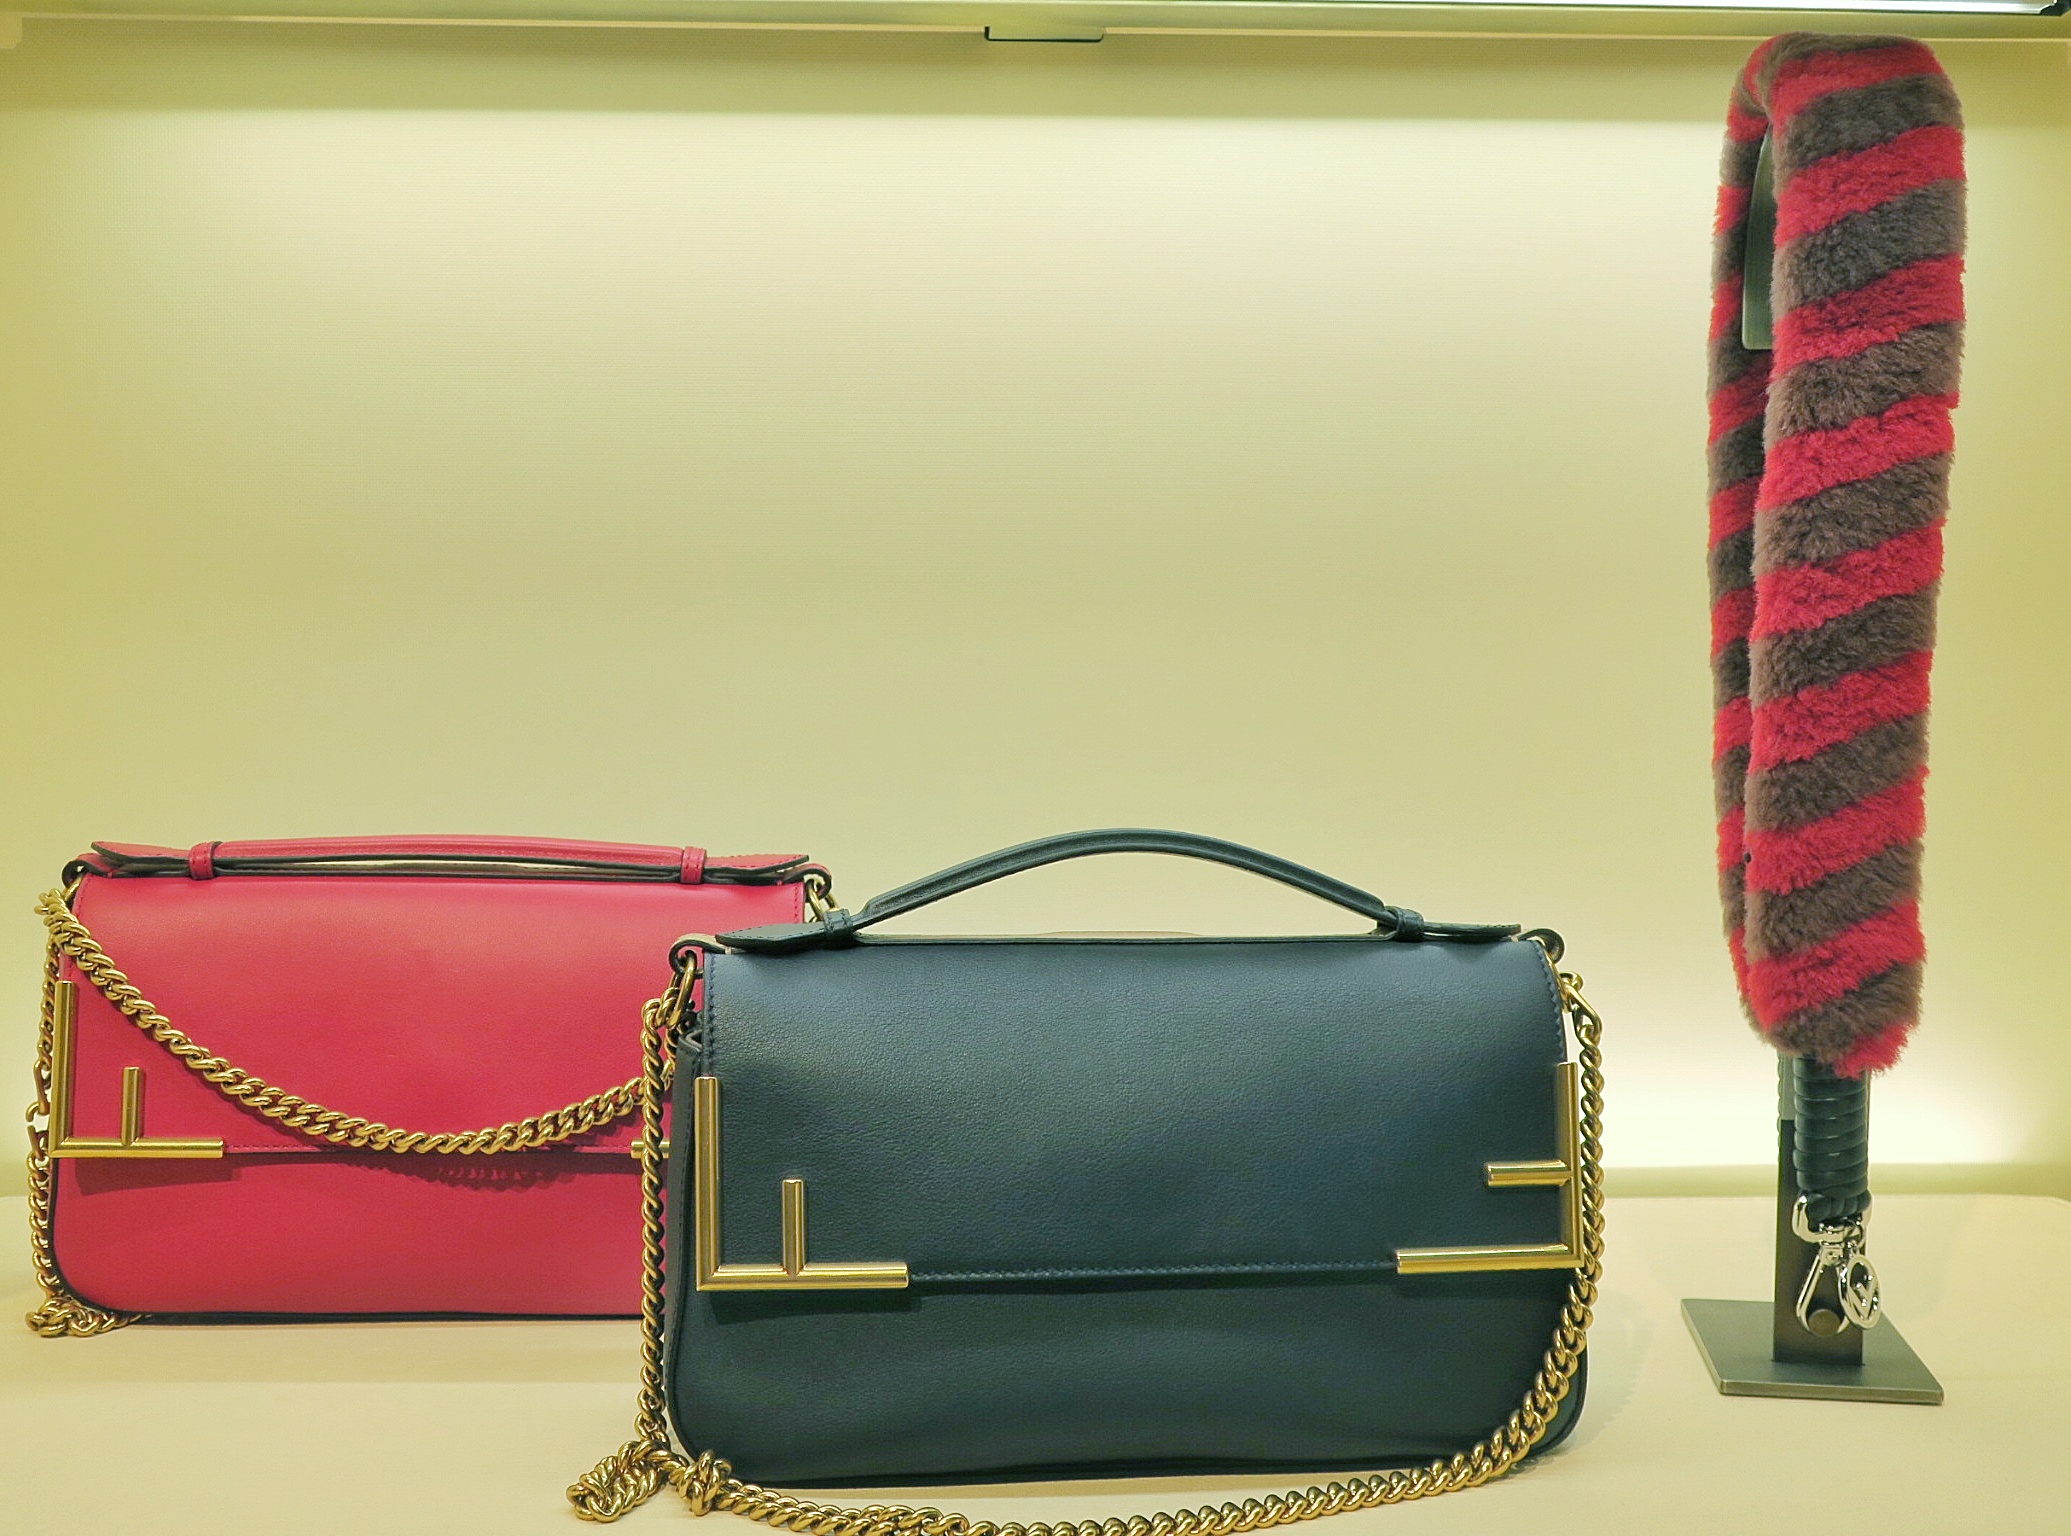 Bag Review: Fendi's New Bags for Fall 